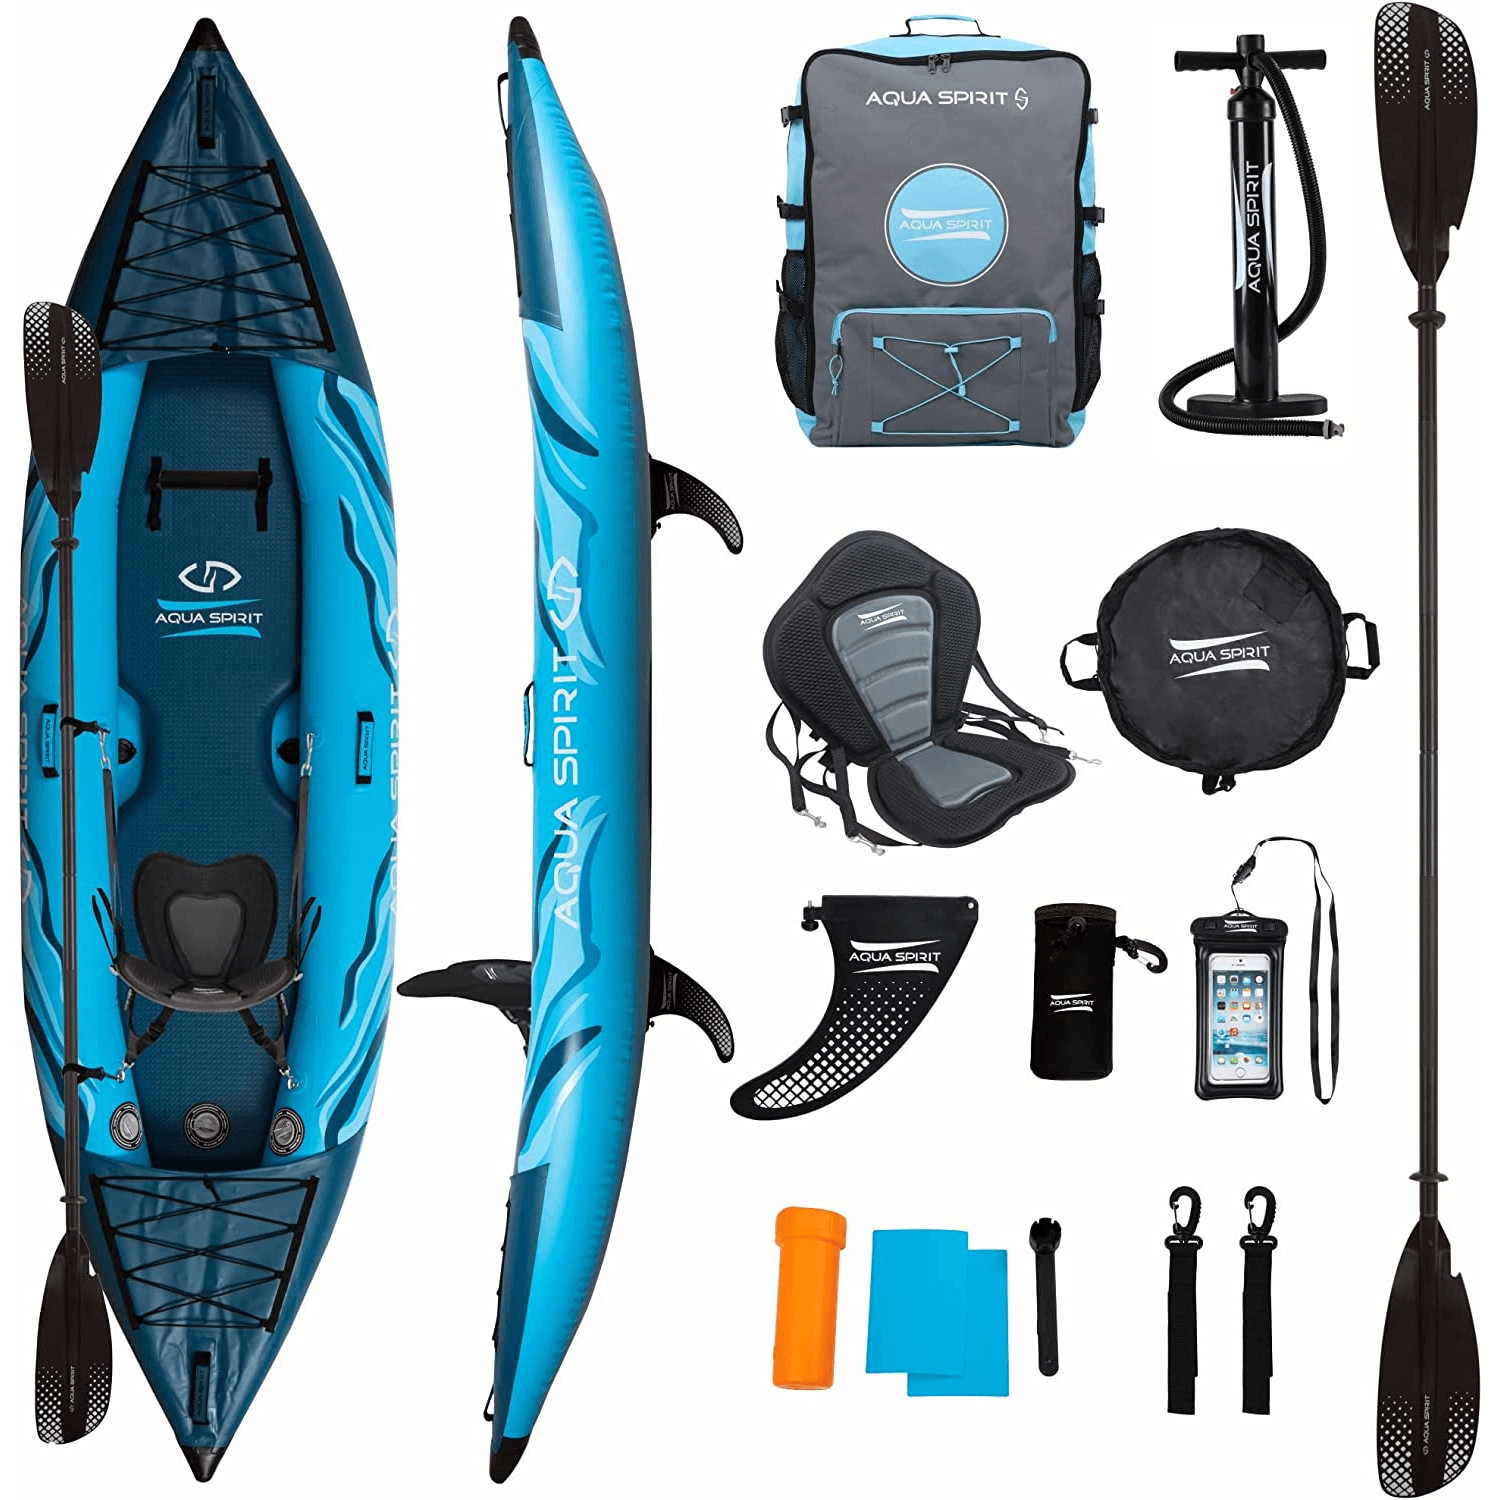 Aqua Spirit Inflatable Kayak Latest 2023 Model, 10'5”/13’5”/1 or 2 Person Complete Kayak Kit with Paddle, Backpack, Double-Action Pump and more accessories/Adult Beginners/Experts - 2 Year Warranty - Aqua Spirit iSUPs UK